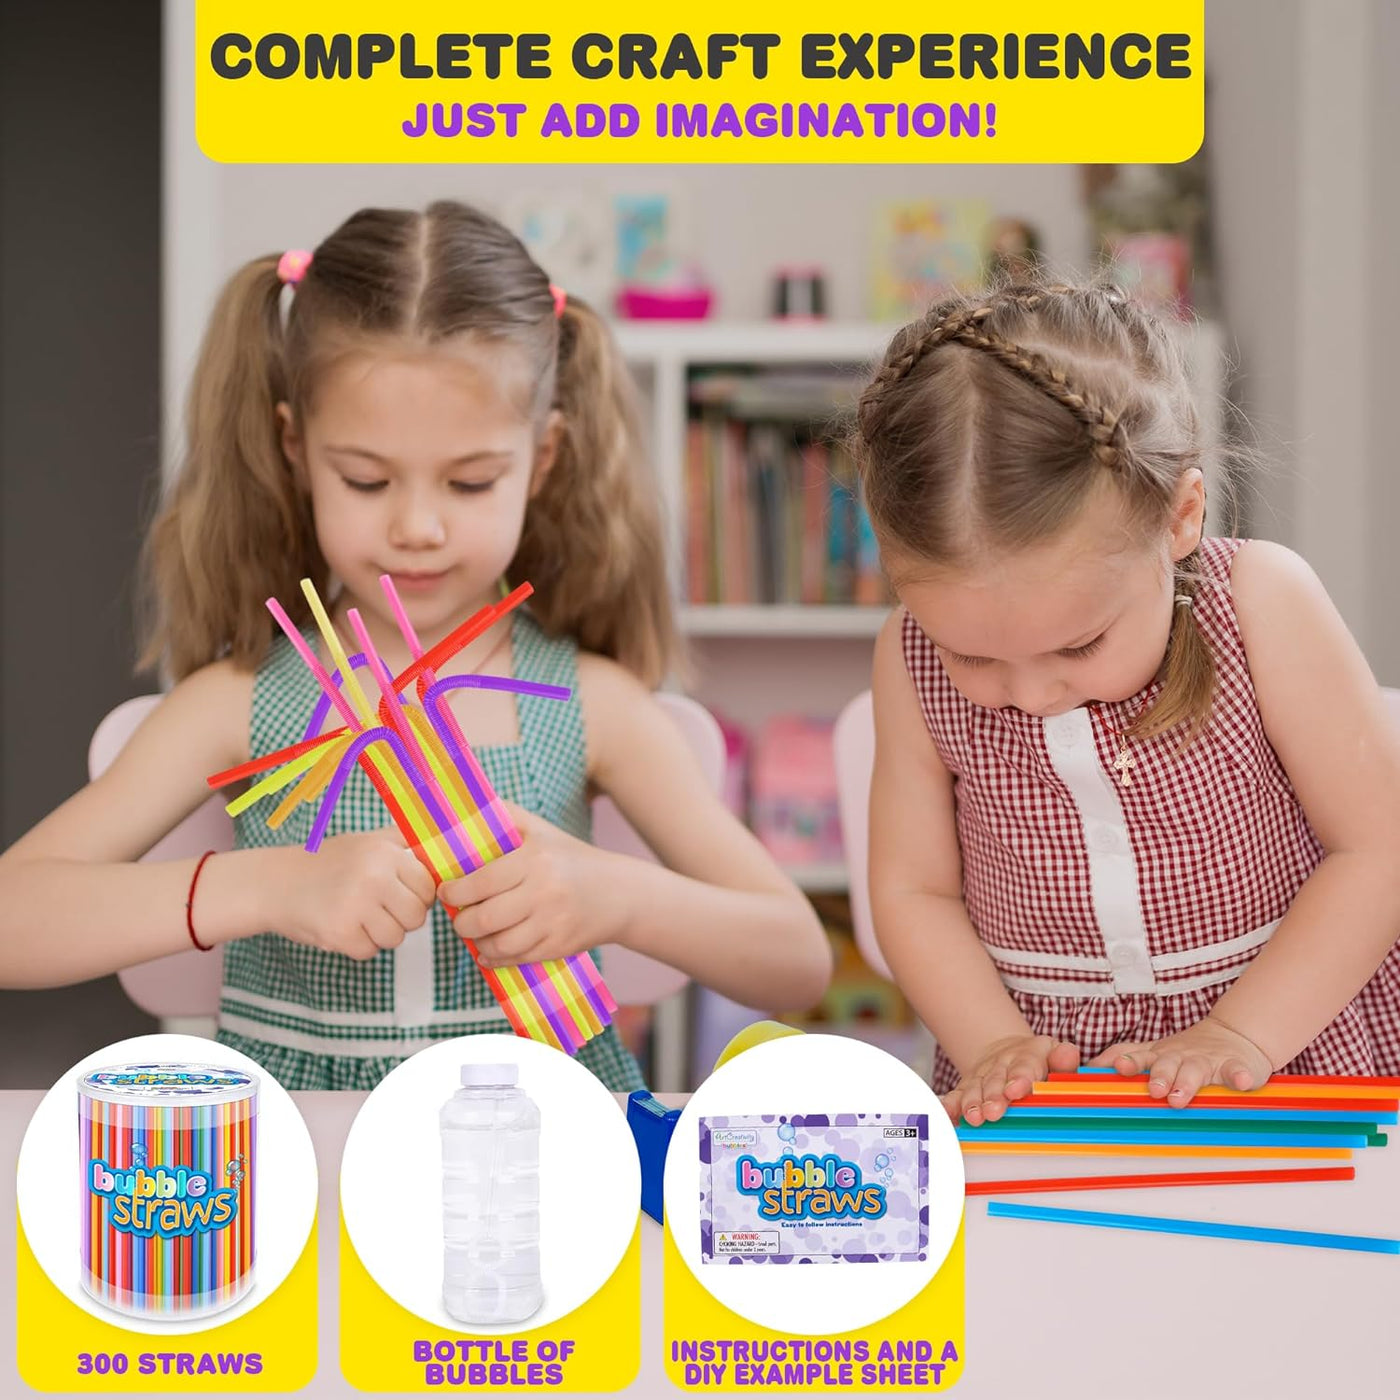 Bubble Straws by ArtCreativity - DIY Bubble Wand Craft for Kids - Set of 300 Straws, Bubble Solution and How-to Guide - - Bubble Wand Craft for Toddlers in 6 Colors - Bubble Blower Craft Ages 4-10